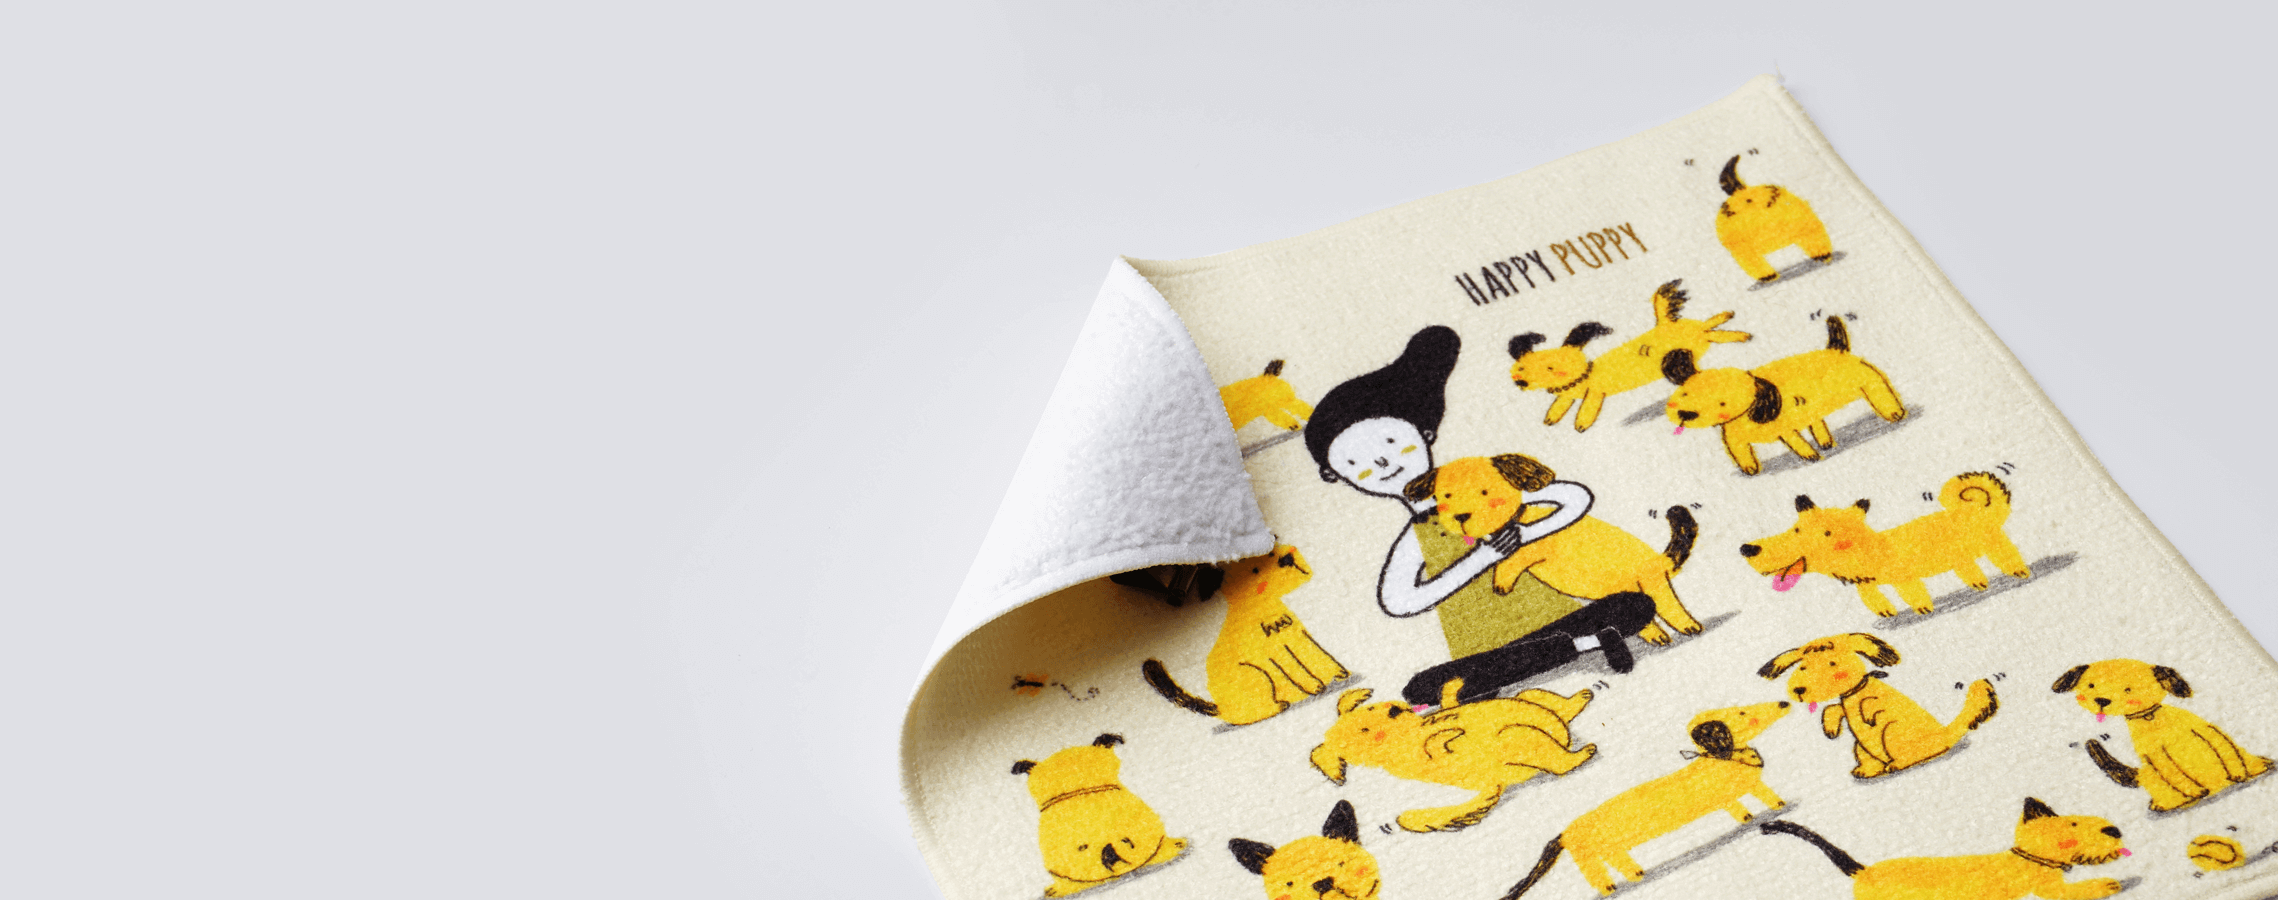 Hand Towel Printing by Singapore